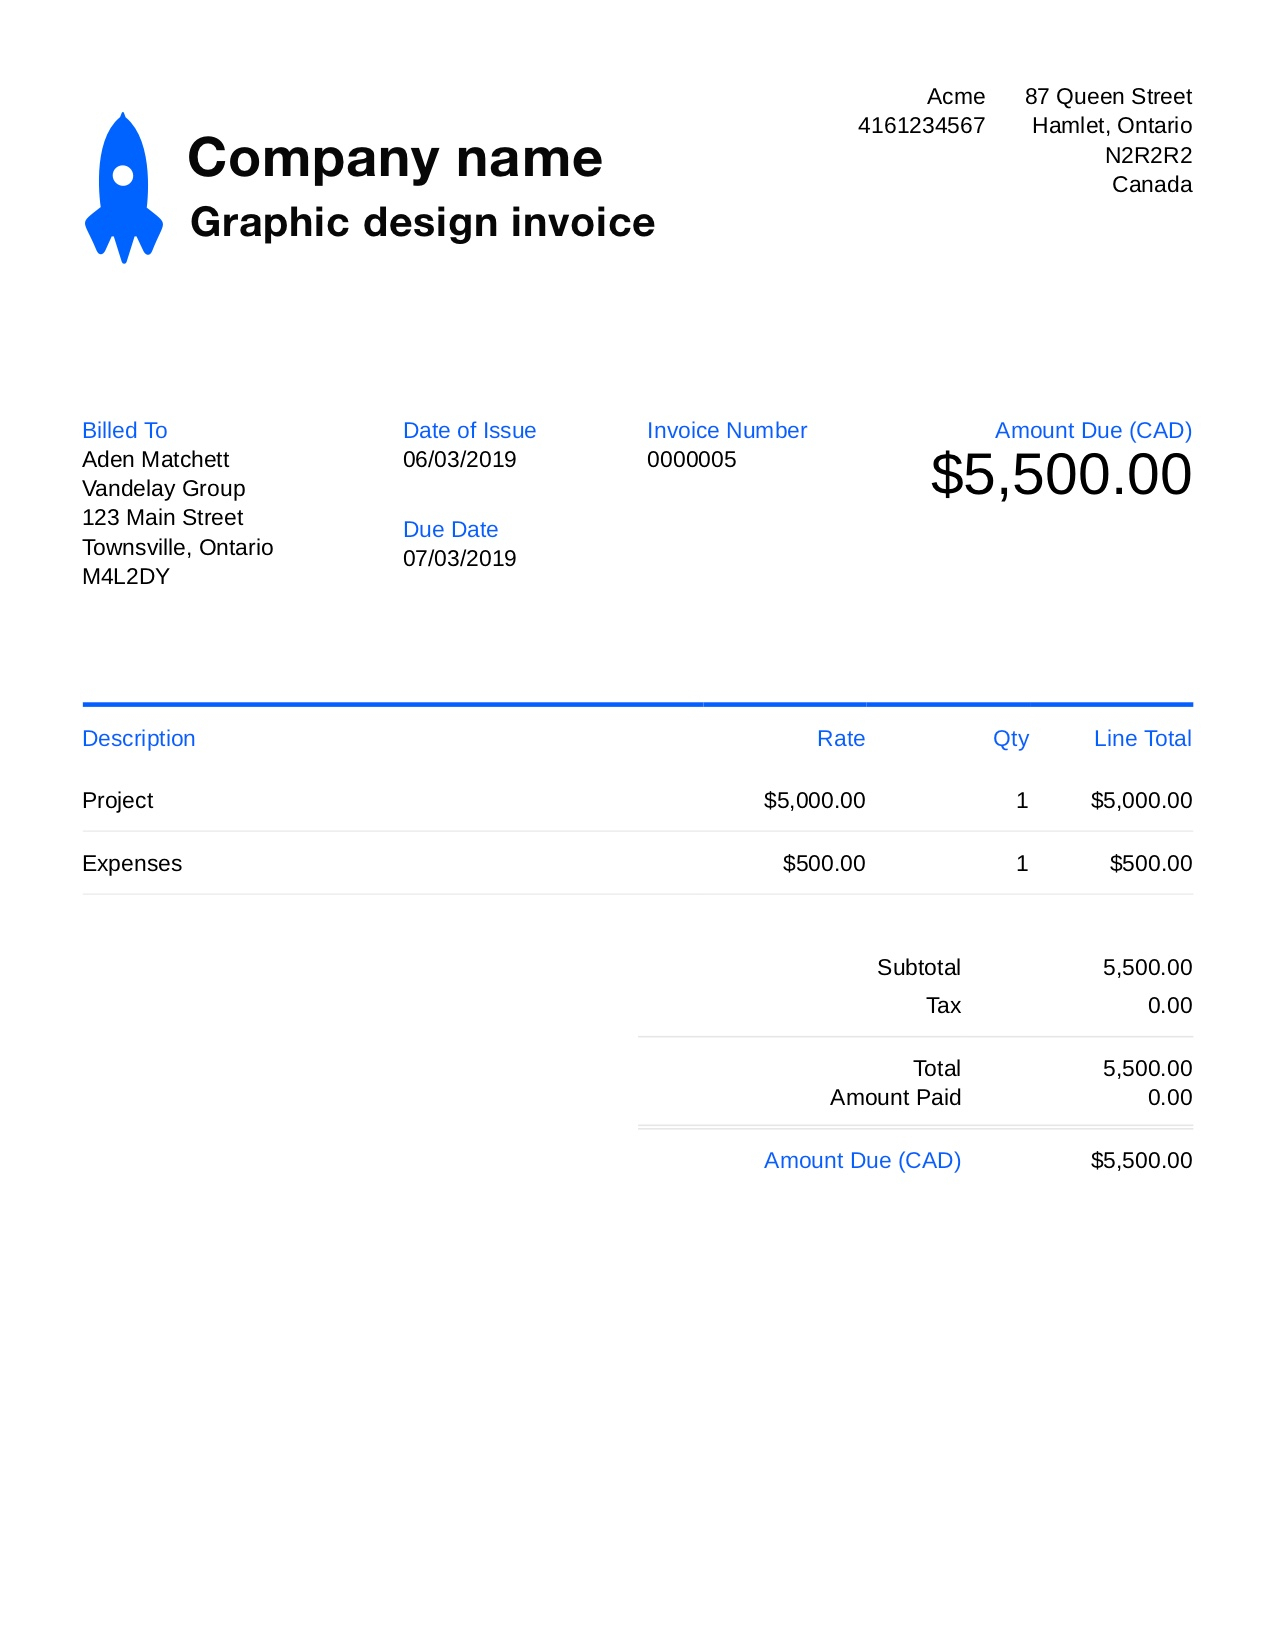 Graphic Design Invoice Template. Customize And Send In 90 Inside Invoice Template For Graphic Designer Freelance